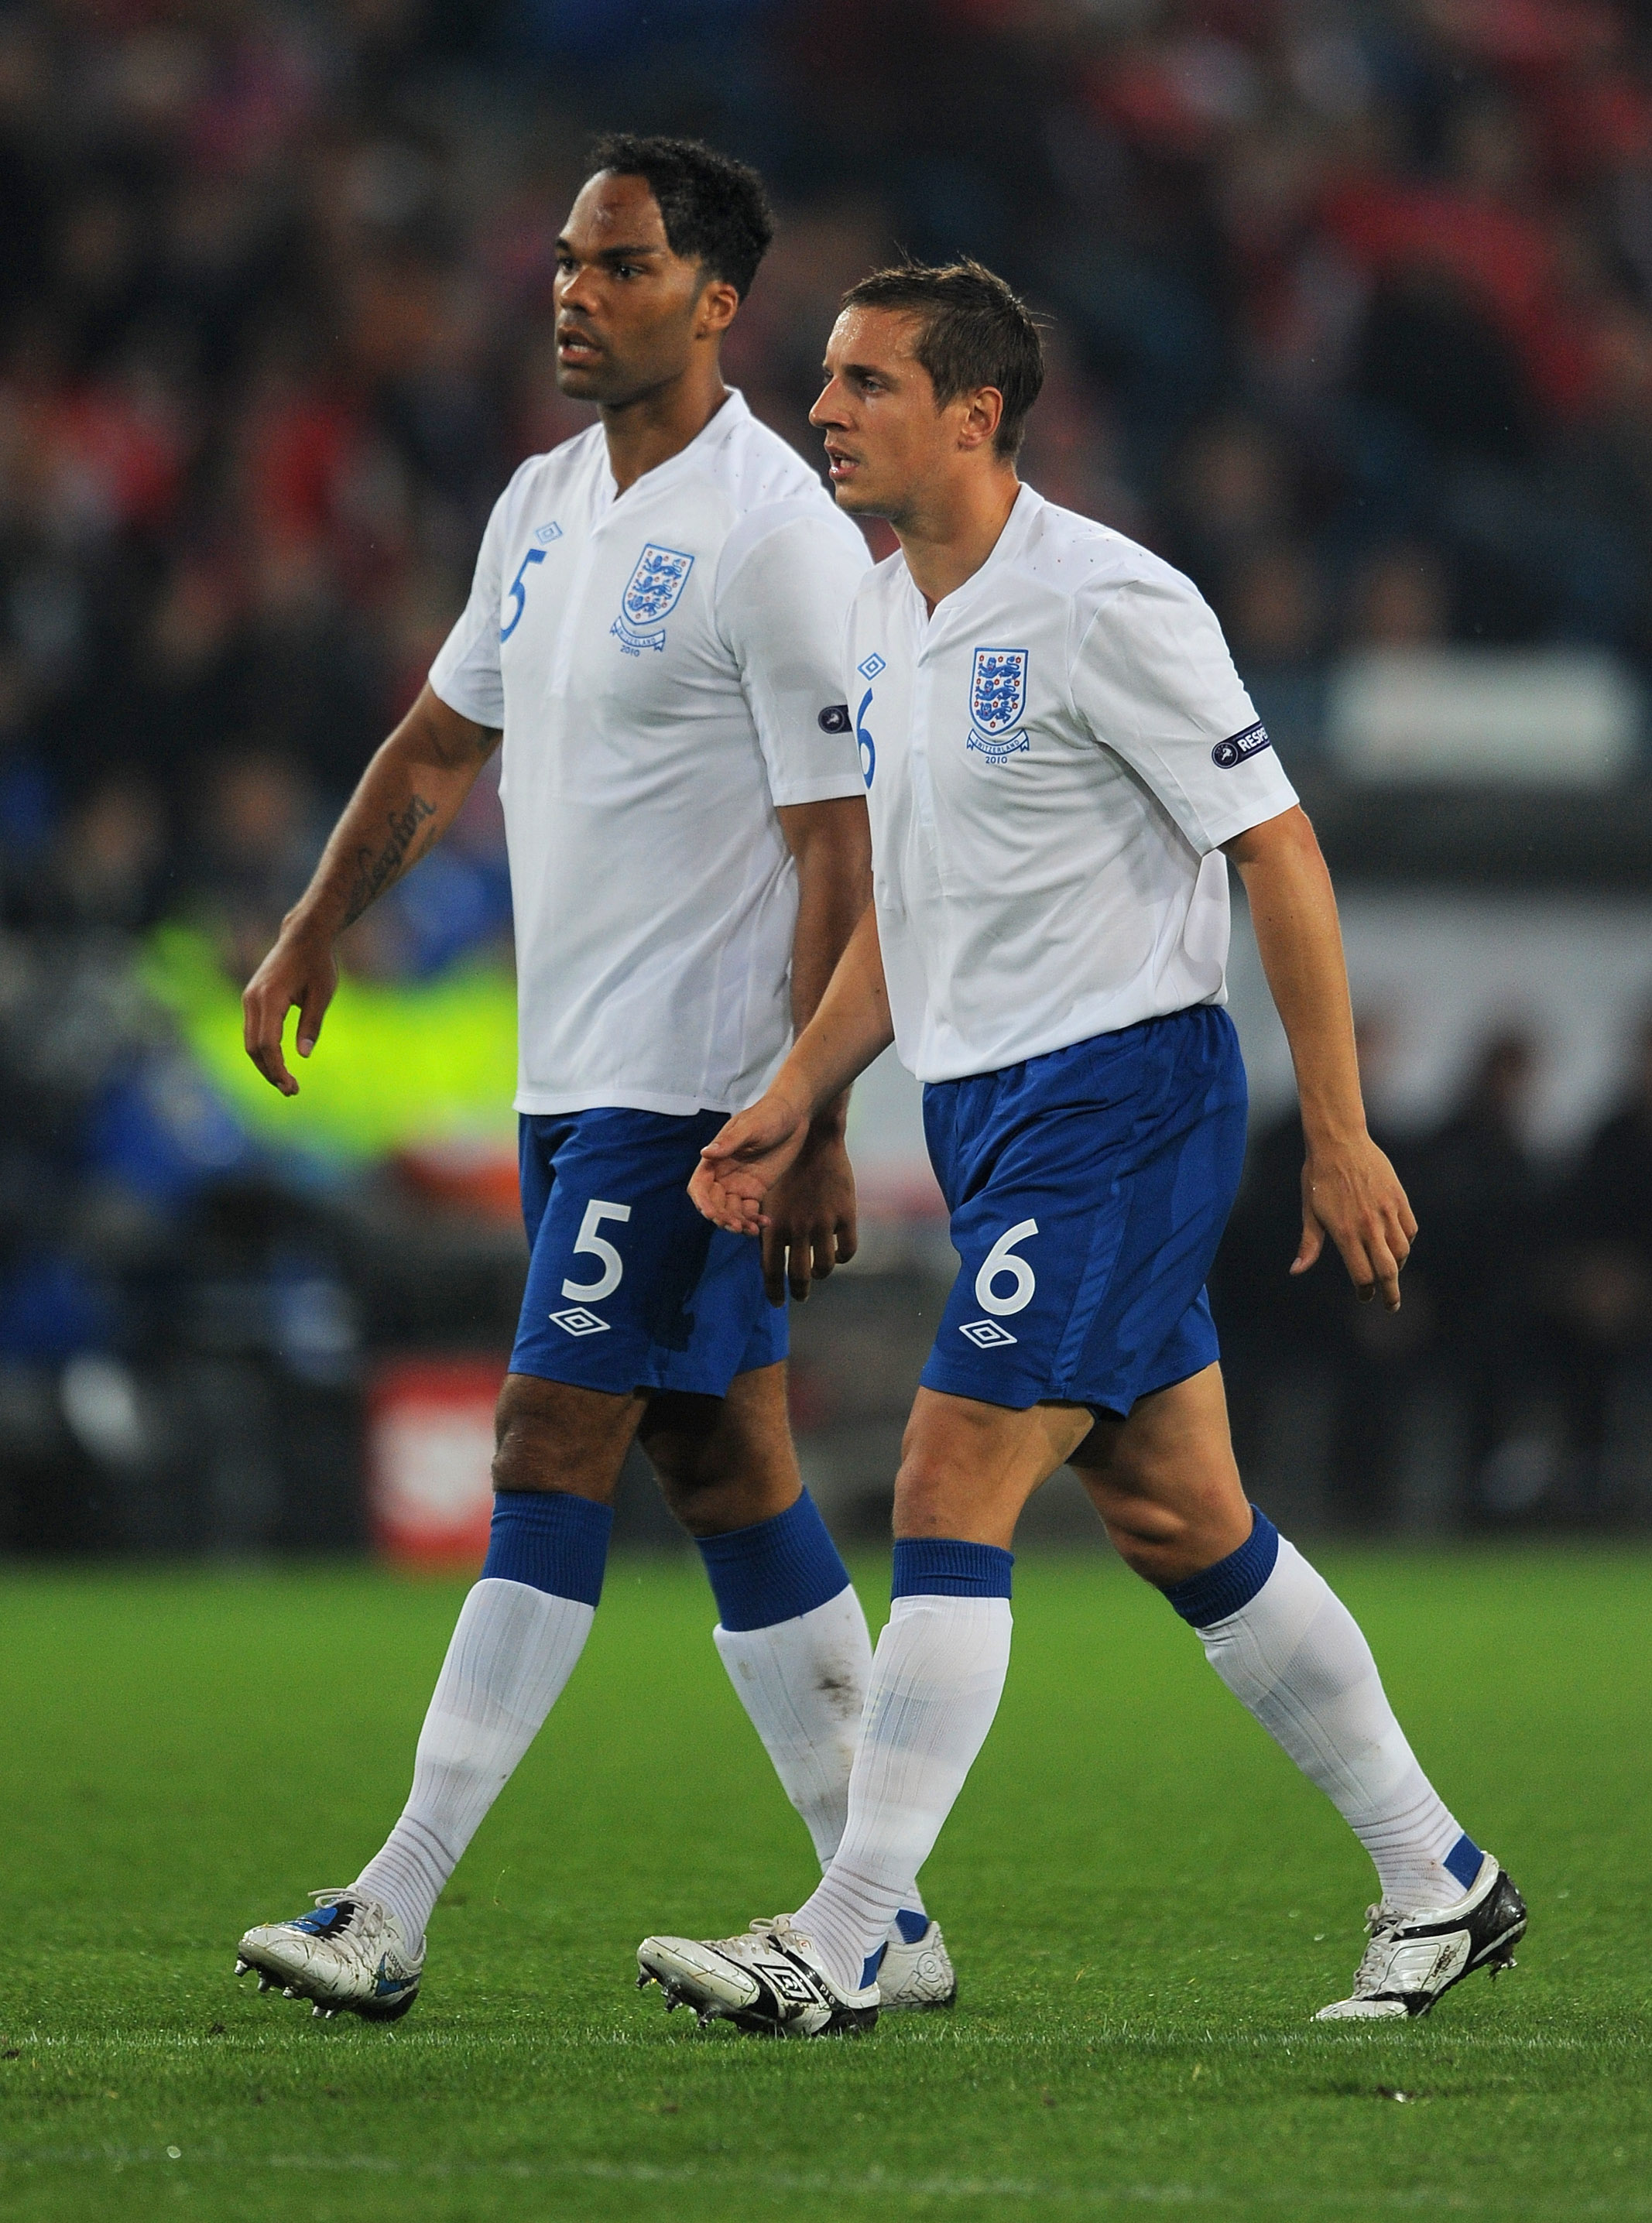 BASEL, SWITZERLAND - SEPTEMBER 07:  Joleon Lescott and Phil Jagielka of England look on during the EURO 2012 Group G Qualifier between Switzerland and England at St Jakob Park on September 7, 2010 in Basel, Switzerland.  (Photo by Michael Regan/Getty Imag